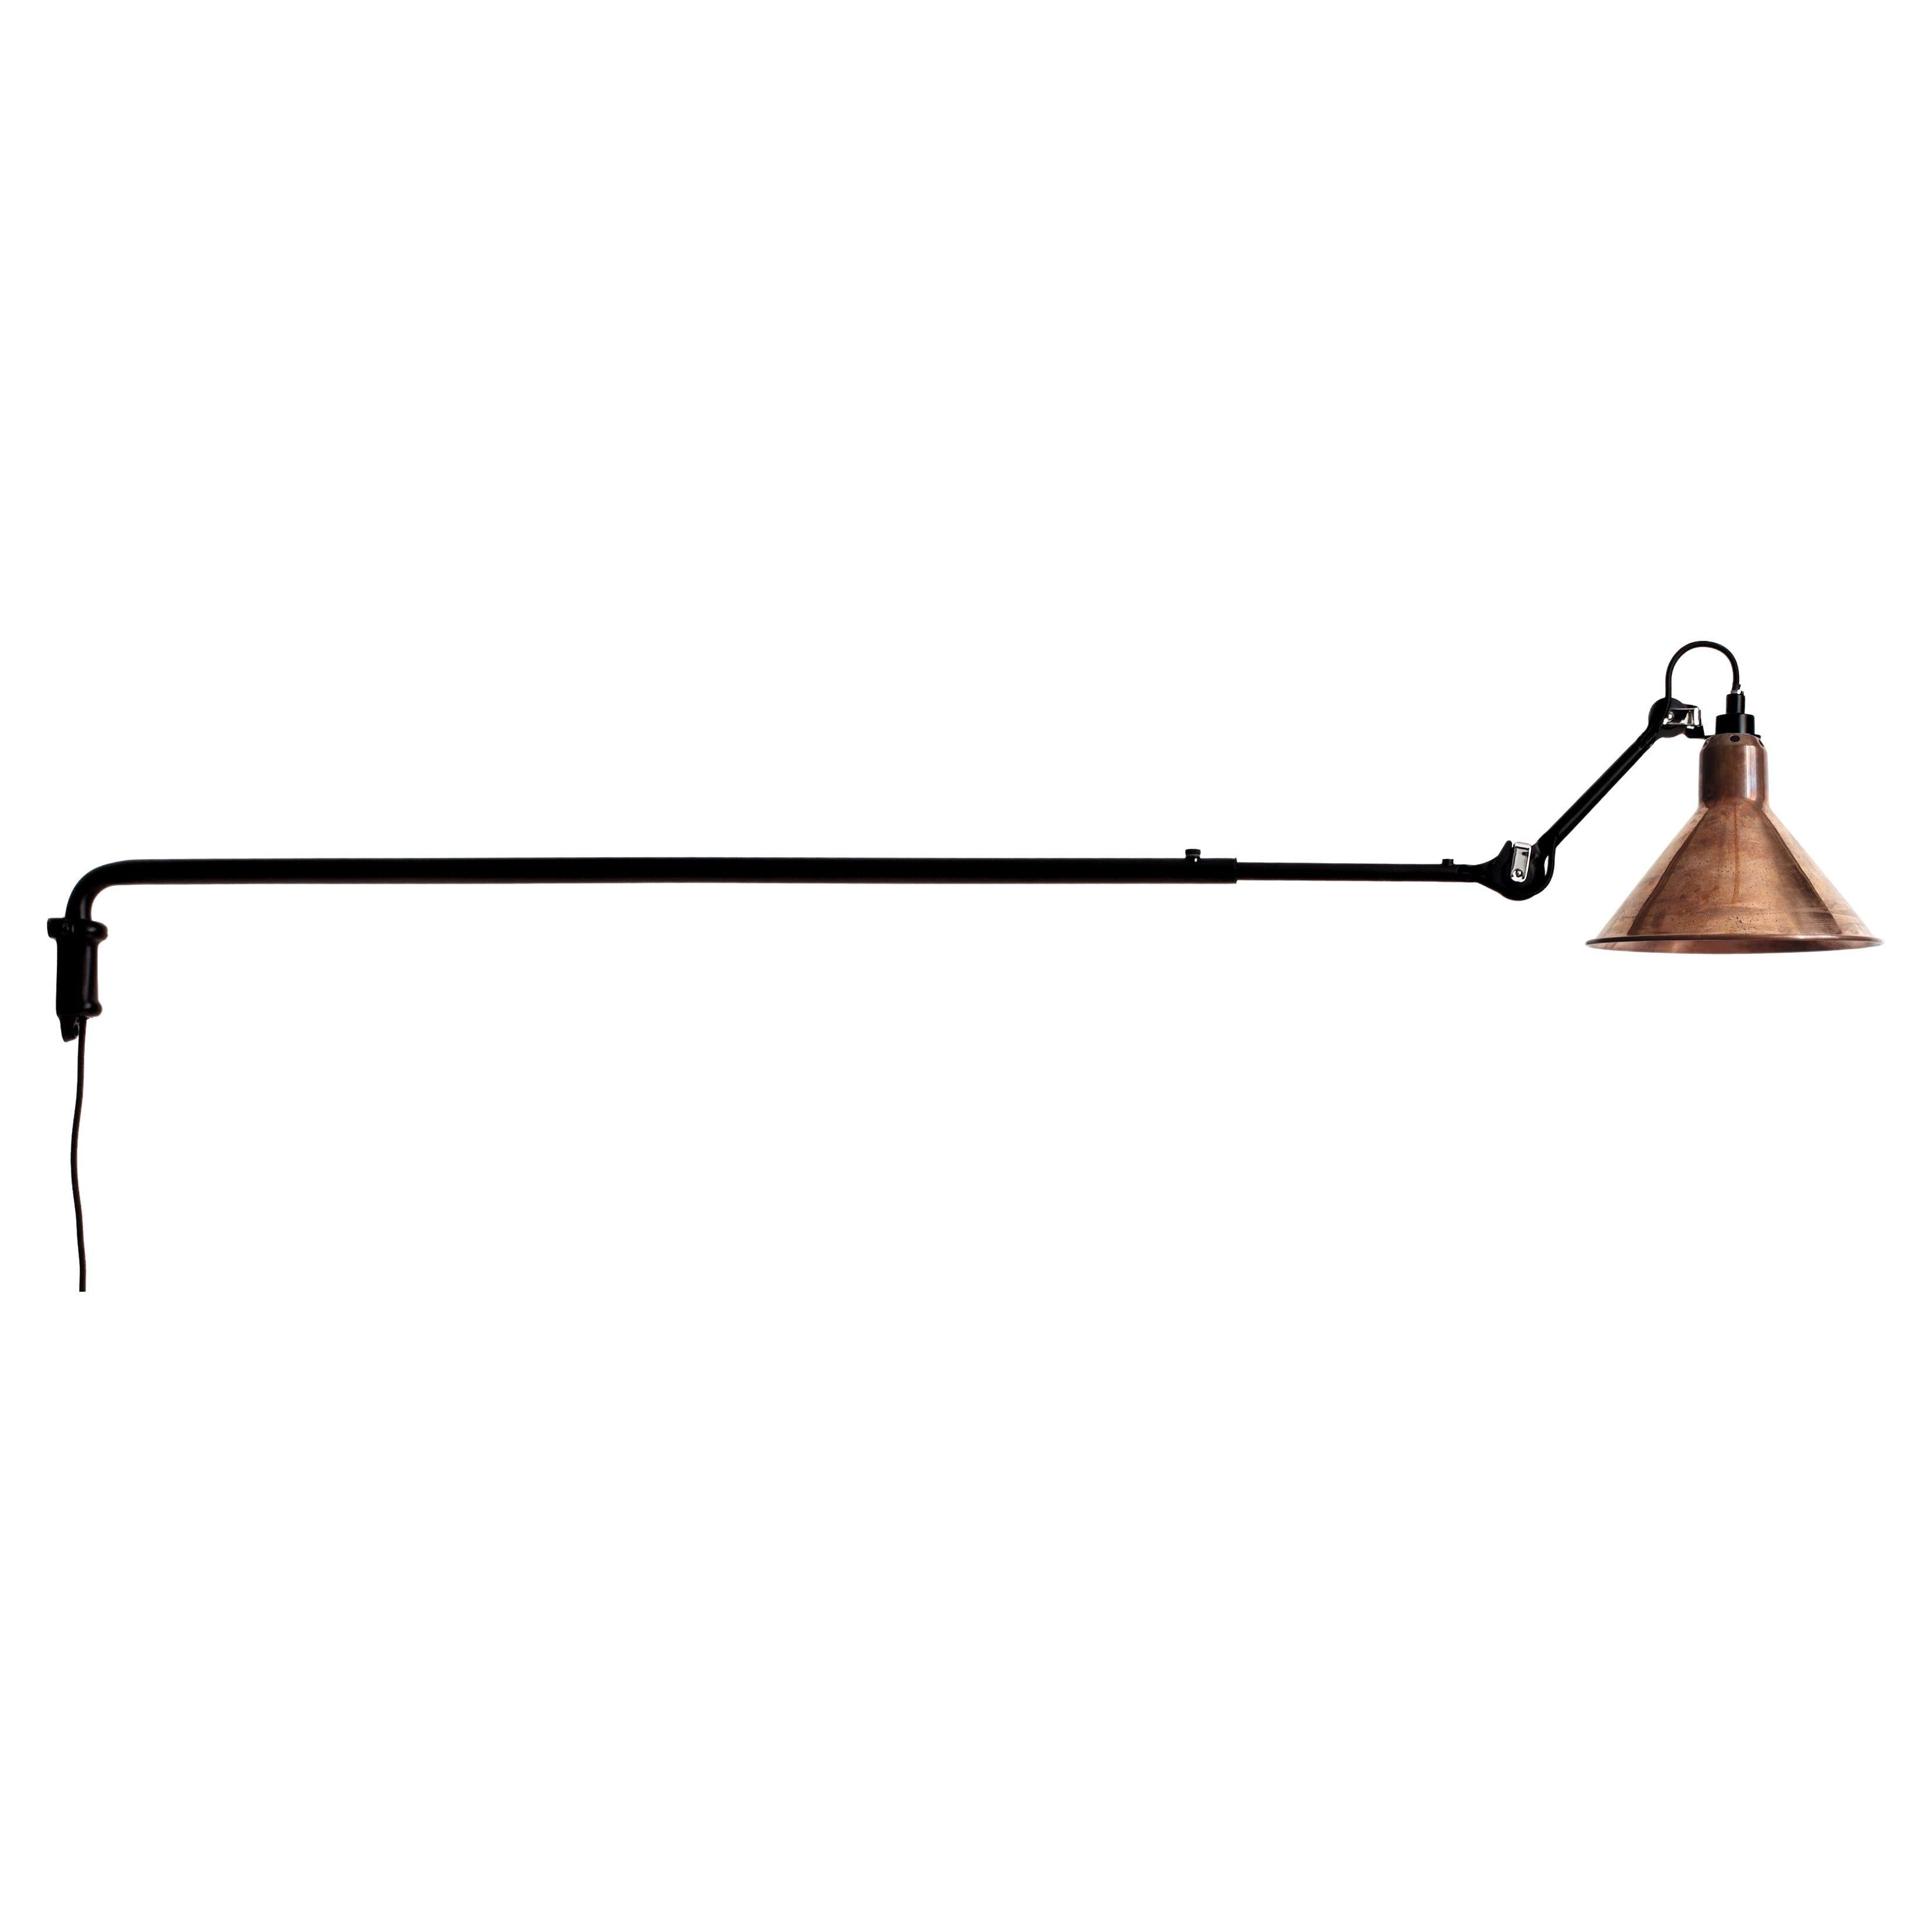 DCW Editions La Lampe Gras N°213 Wall Lamp in Black Arm and Raw Copper Shade For Sale